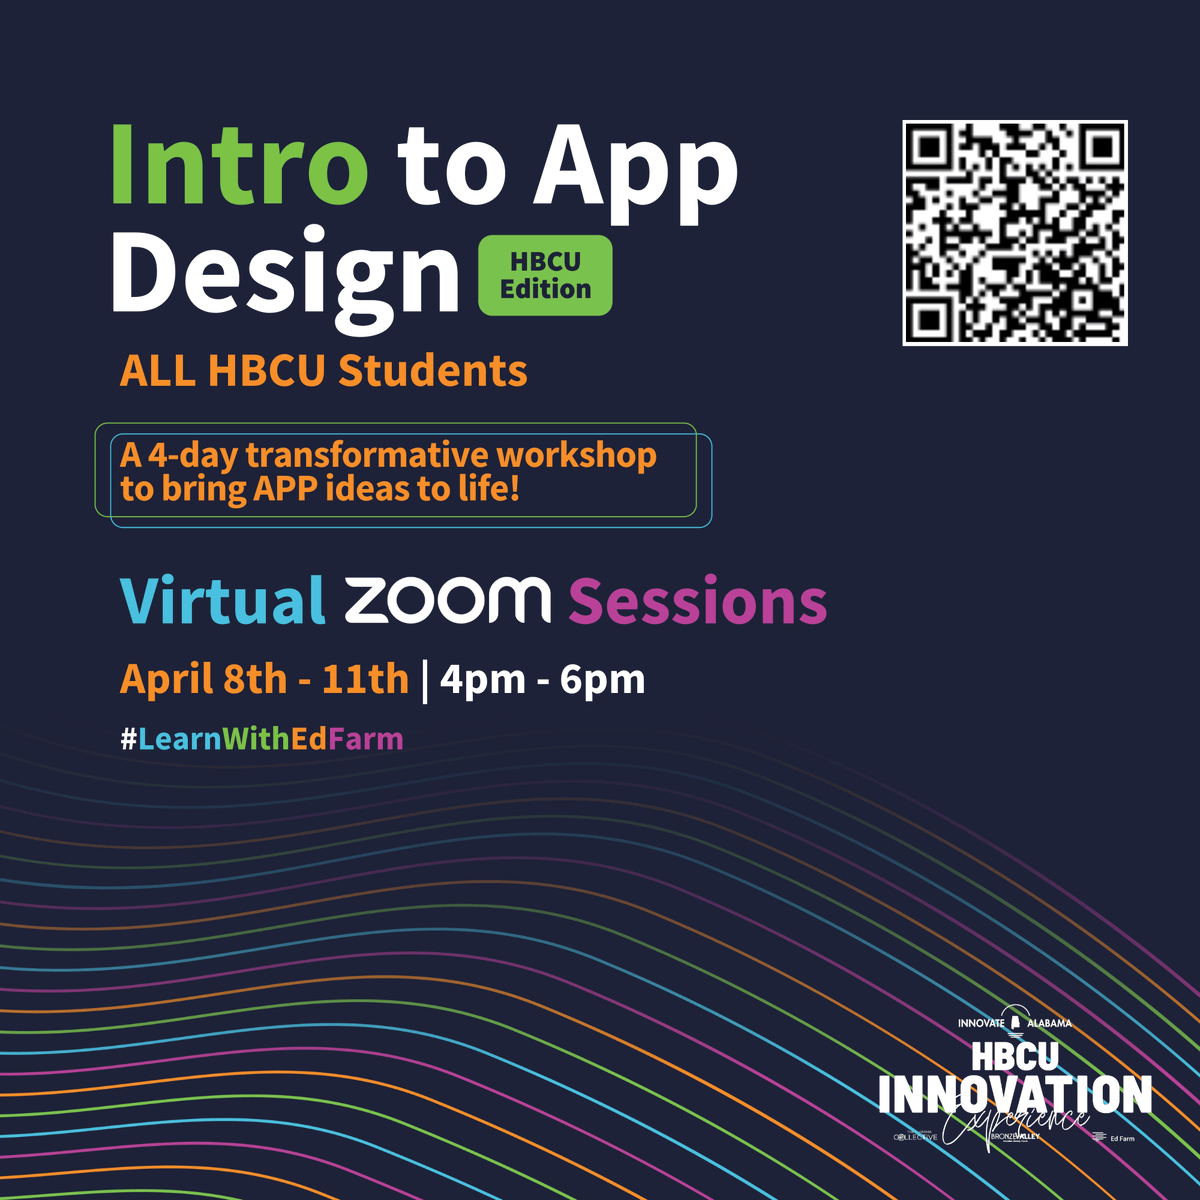 📱Exclusive Opportunity for HBCU Students: Join Our Intro to App Design Workshop! 🎨 HBCU students! Ever thought about creating your own apps? We've got a special workshop just for you, with a chance to win a grand prize of $1000! Scan the QR code to register! #LearnwithEdFarm